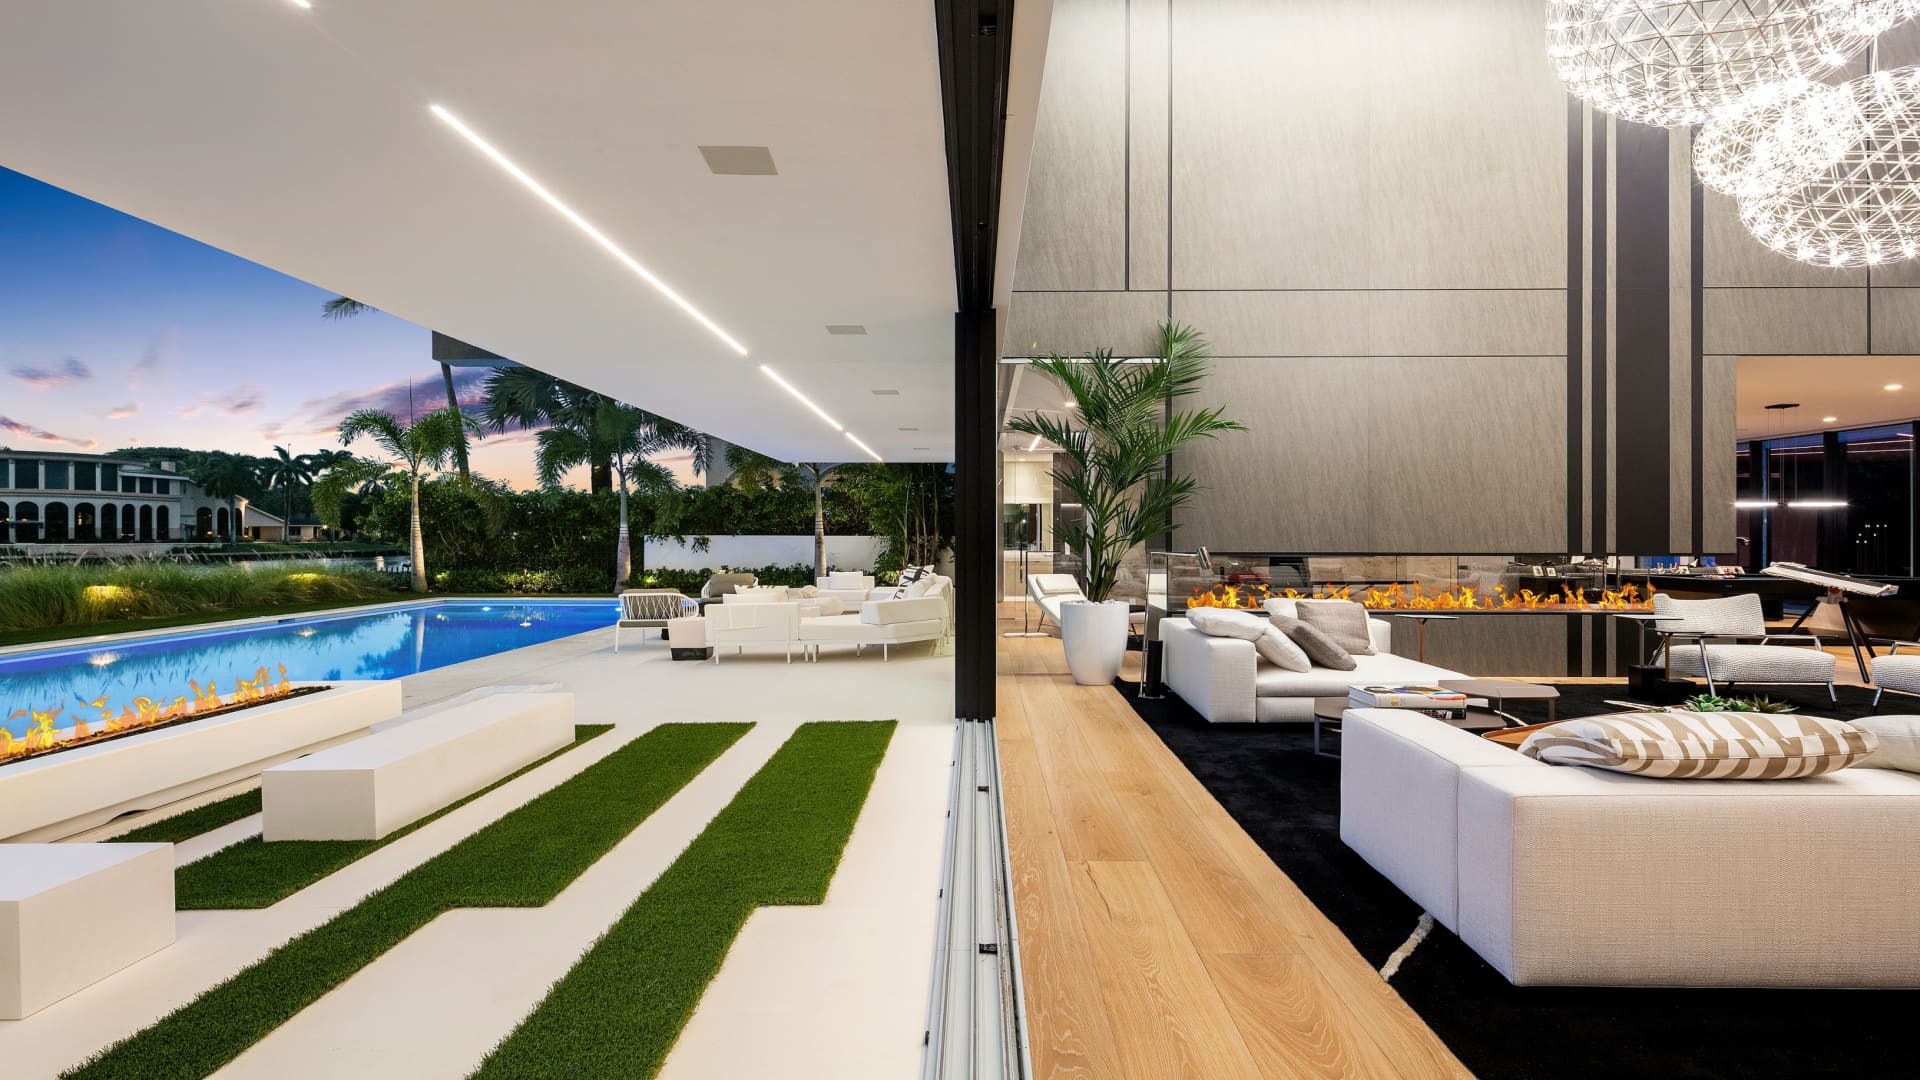 A retractable glass wall opens the great room to the outdoor lounge and pool.